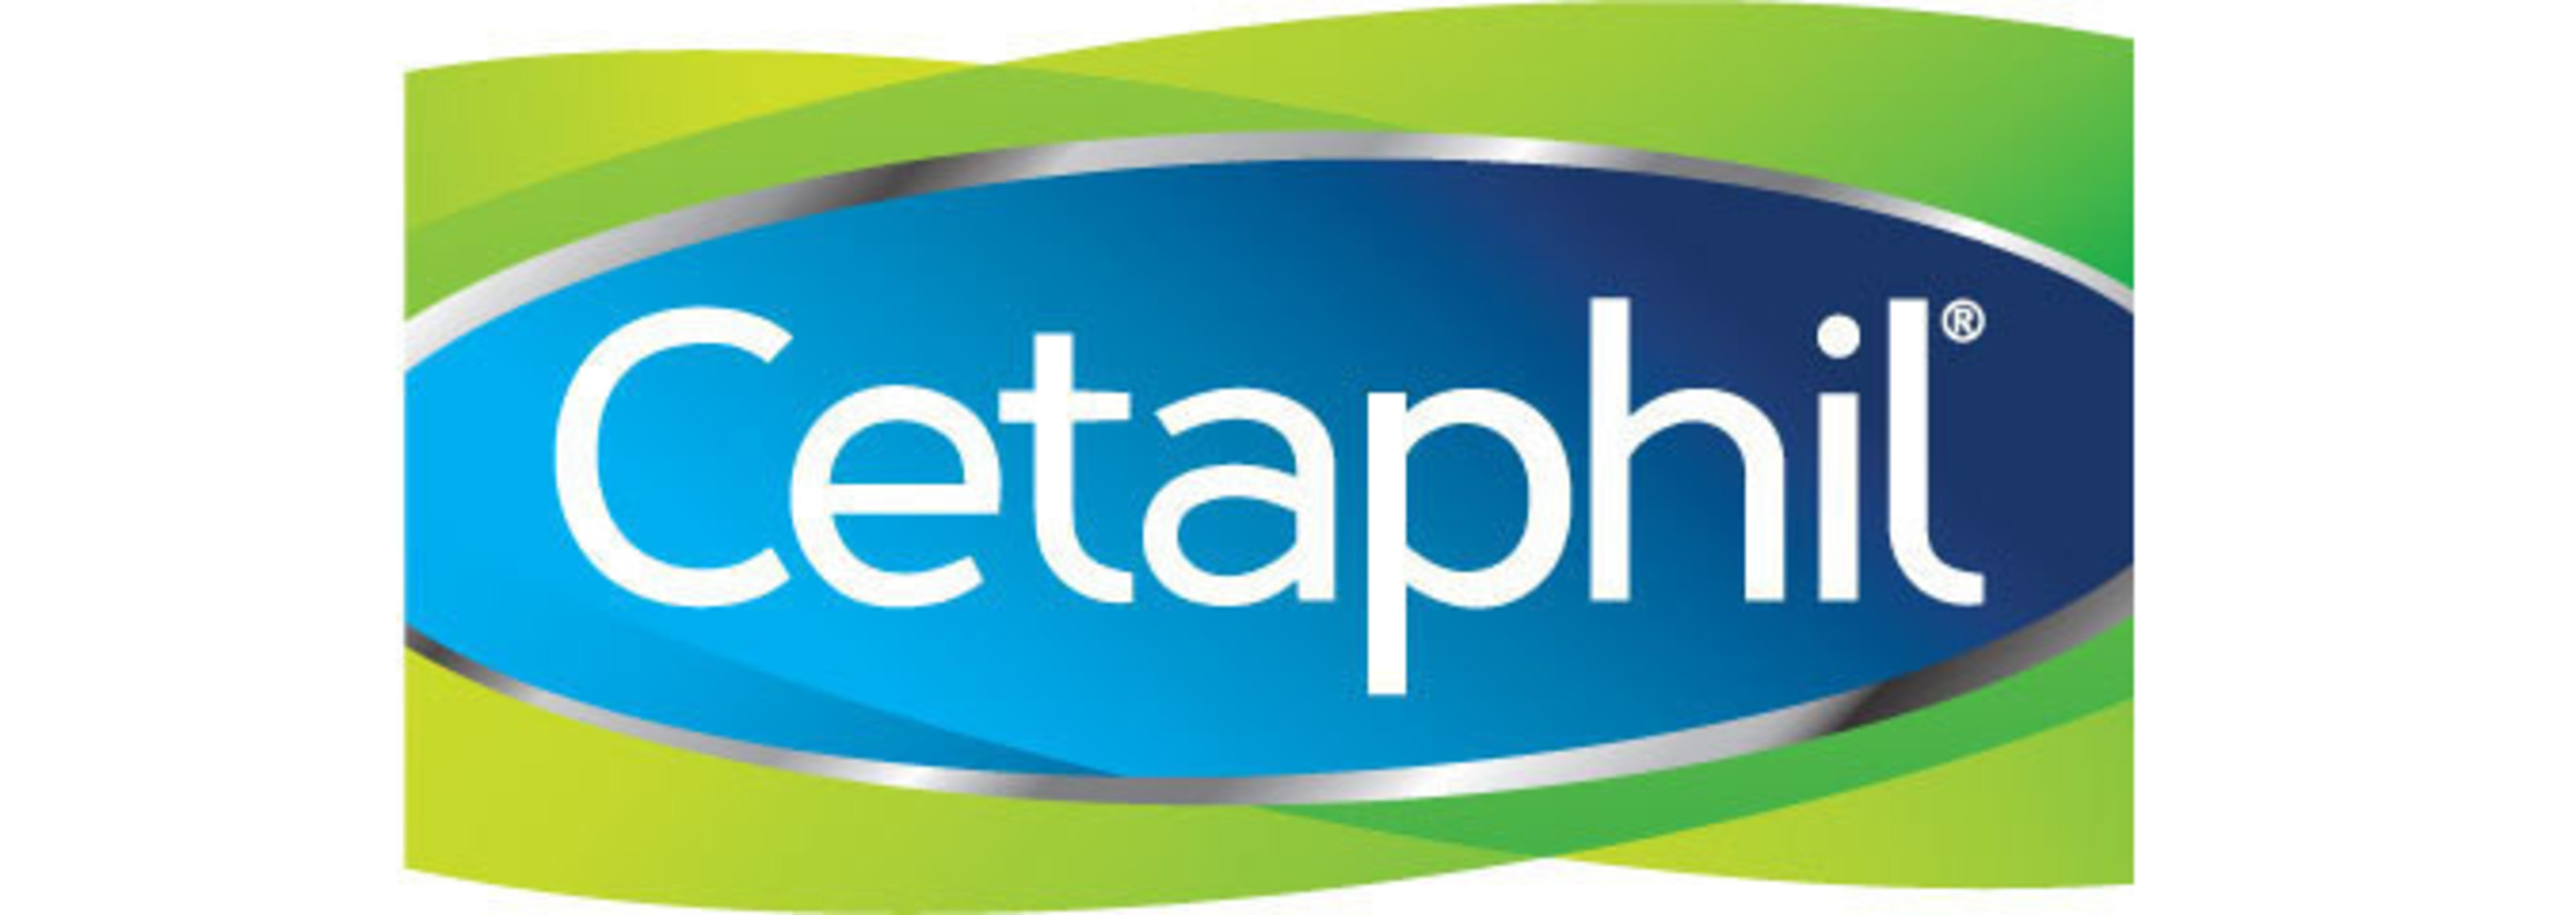 Galderma Unveils the New Cetaphil(R) Brand Graphics & Packaging